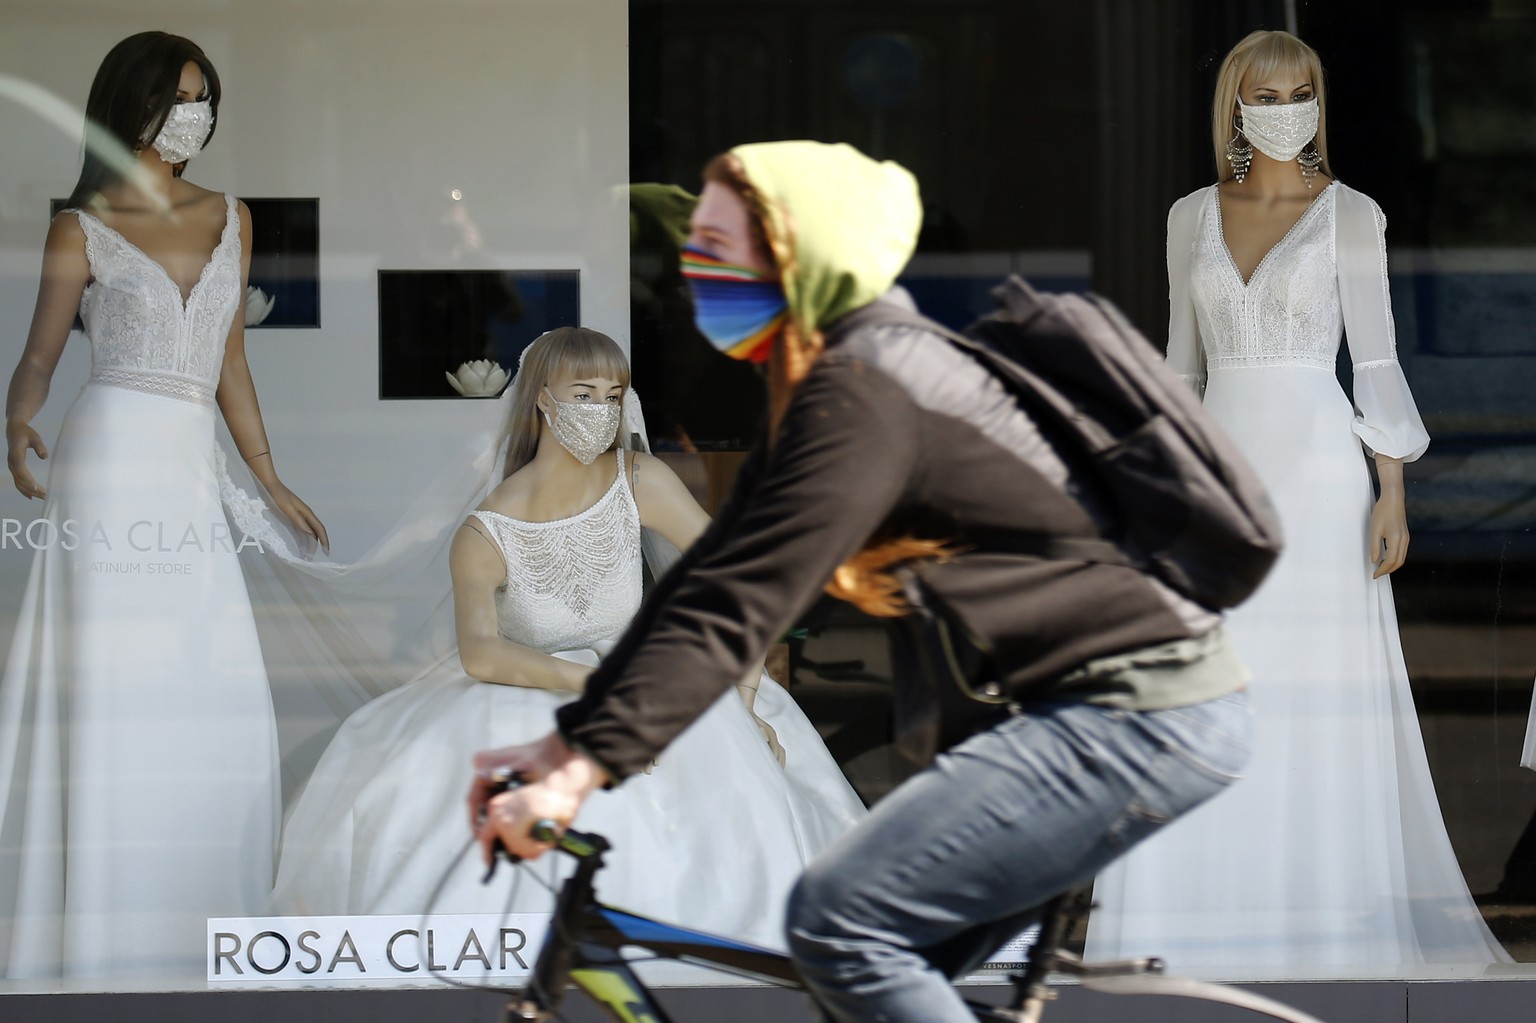 epa08297485 Mannequins dressed with face masks are displayed in the window of a wedding dress salon in Zagreb, Croatia, 16 March 2020. According to reports on 16 March 2020, Croatia has 49 confirmed c ...